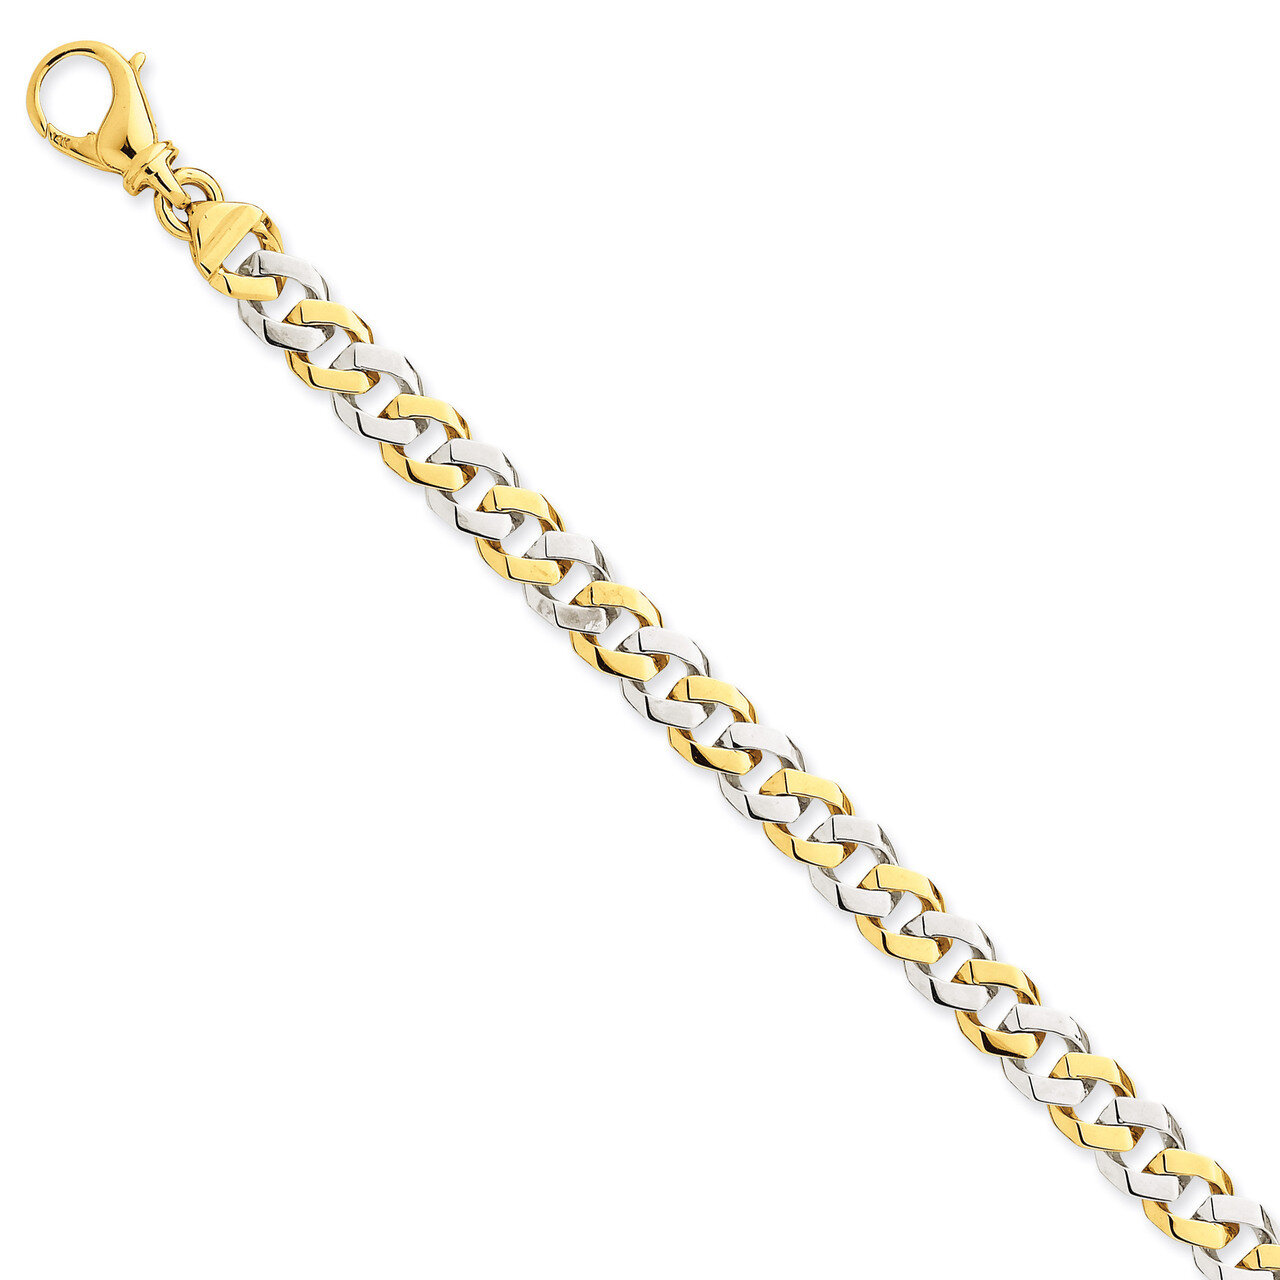 7.85mm Polished Fancy Link Chain 20 Inch 14k Two-Tone Gold LK515-20